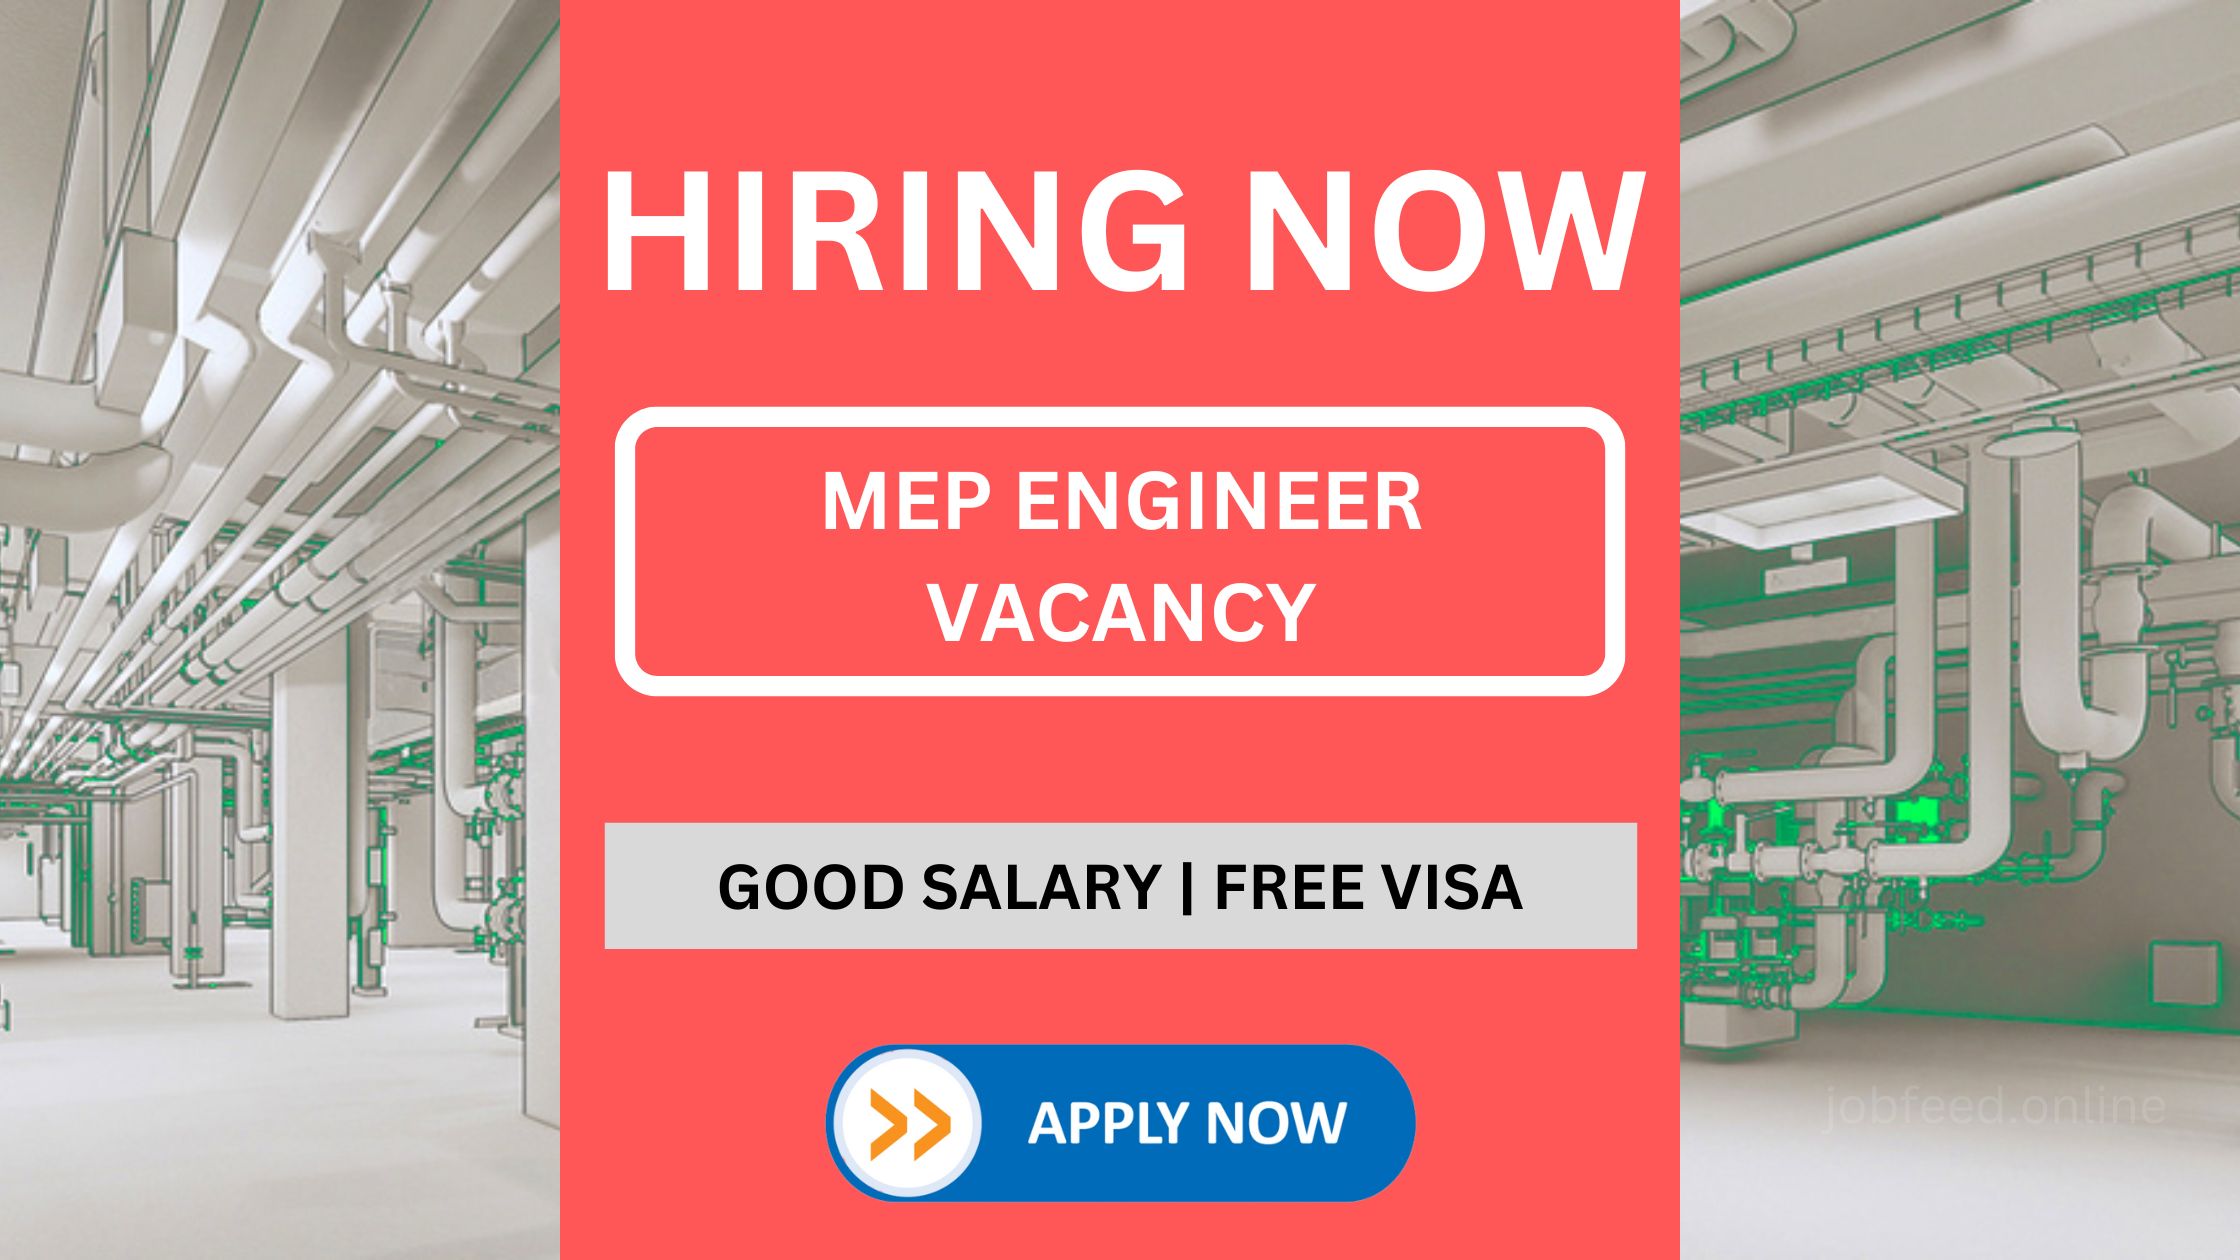 MEP Engineer Job in Abu Dhabi | Hiring for Civil Construction and Facility Management | 5+ Years UAE Experience | Driving License Required